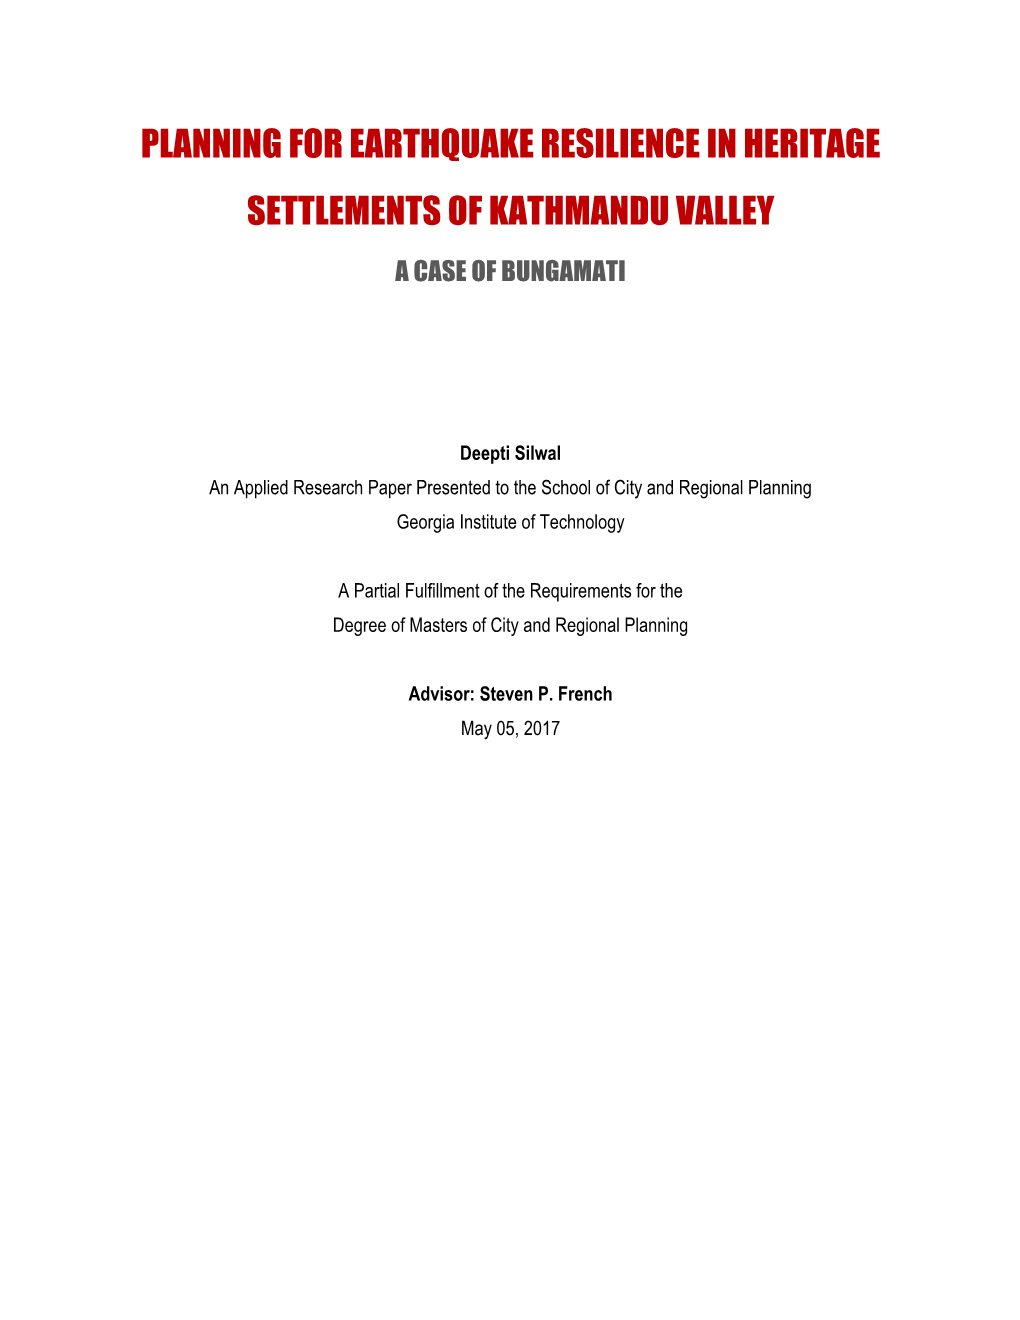 Planning for Earthquake Resilience in Heritage Settlements of Kathmandu Valley